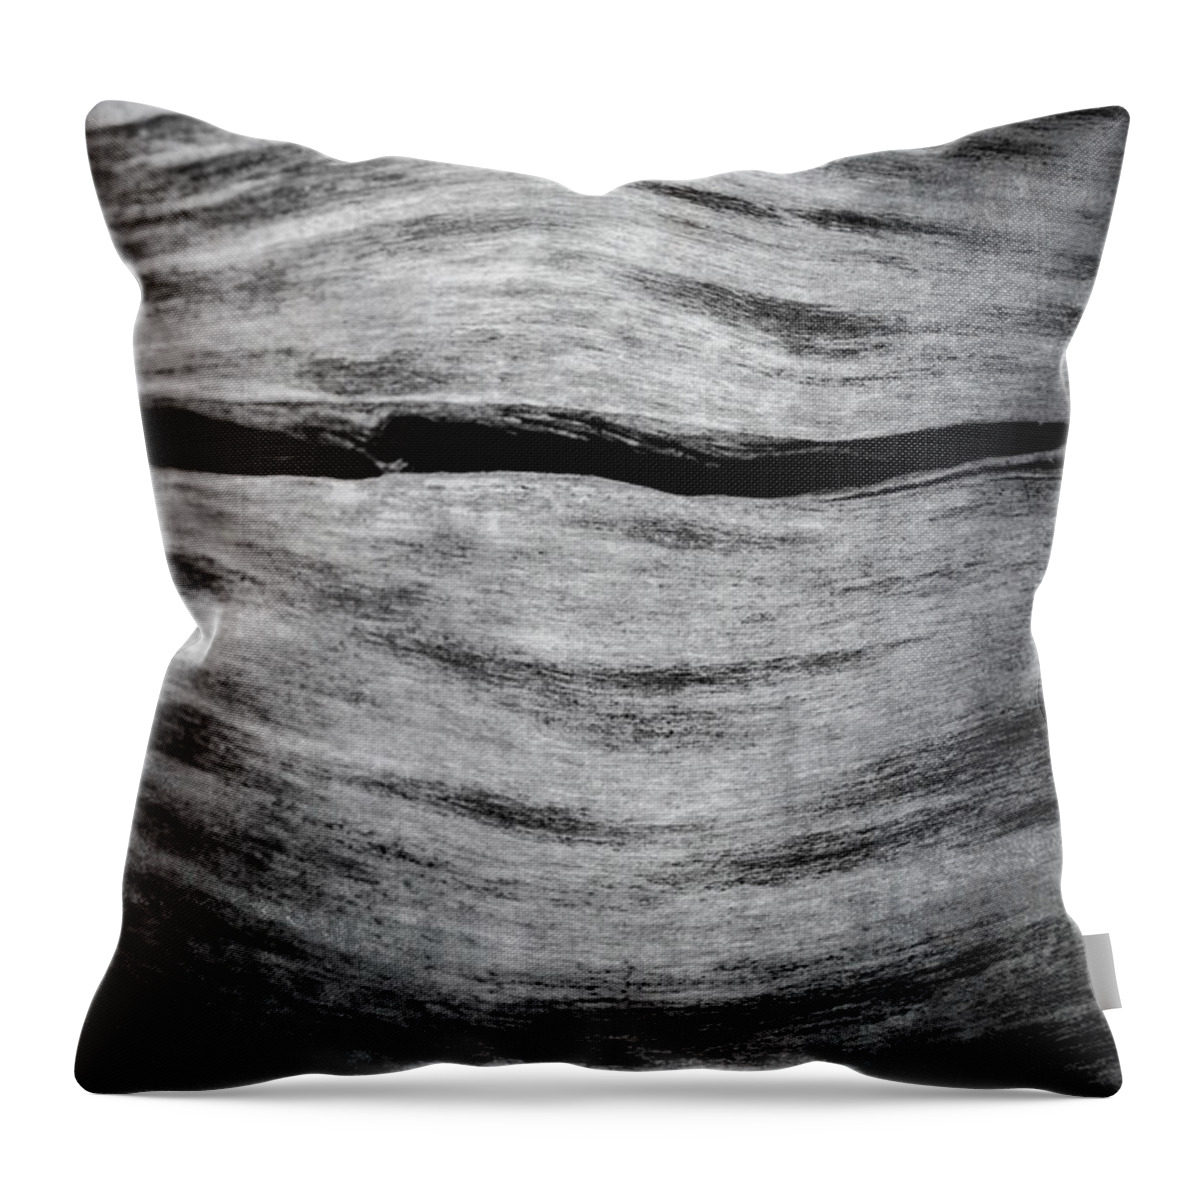 Abstract Throw Pillow featuring the photograph Abstract Log by Tamara Becker